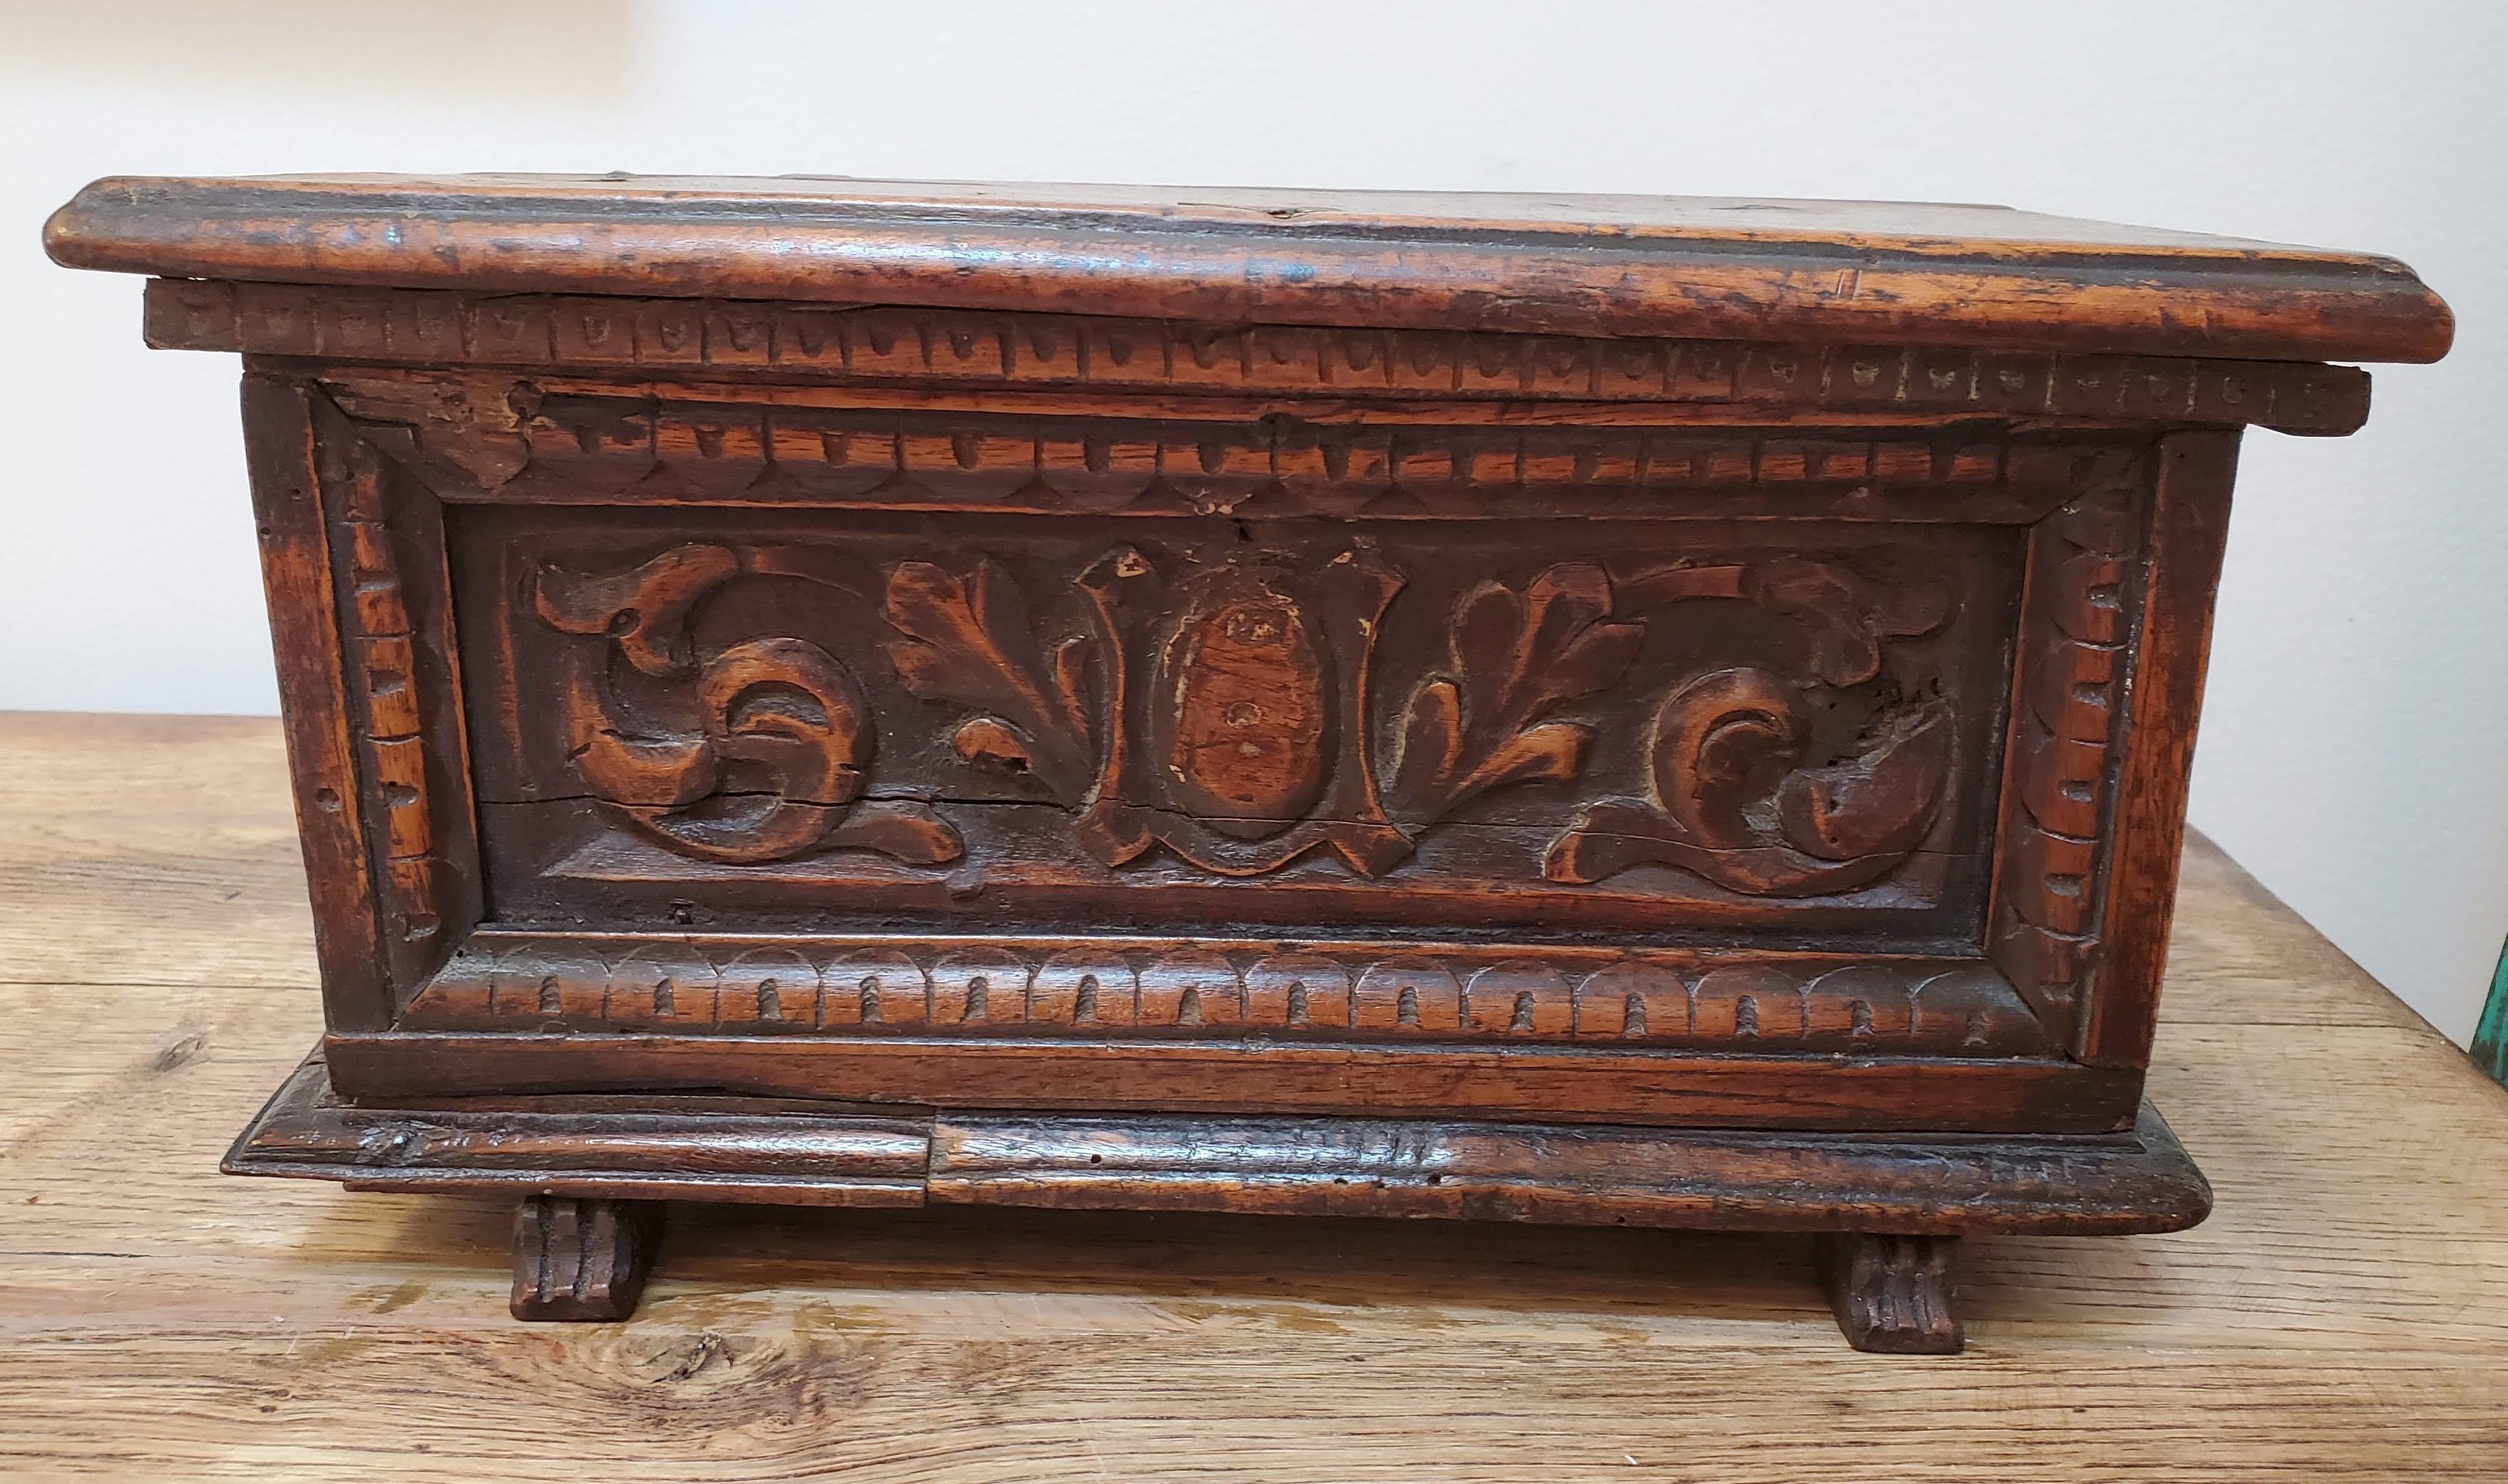 Add this uniquely small late Italian renaissance cassone (or marriage chest) to your collection for bit of historic sophistication. With centrally carved panel over molded base and carved feet, this box, made of Circassian walnut with a deep